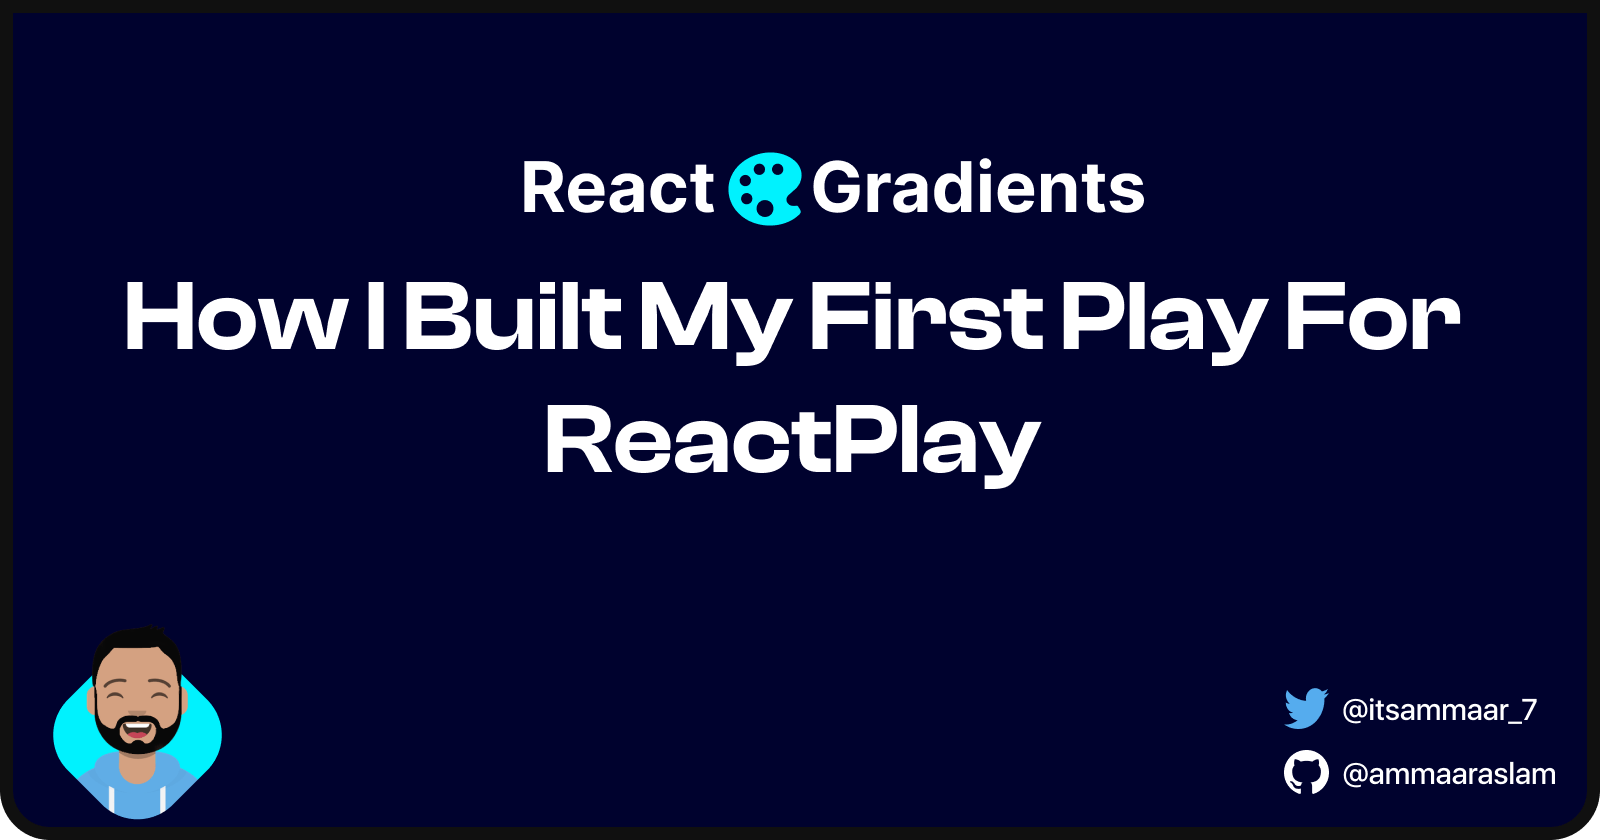 How I Built My First Play For ReactPlay